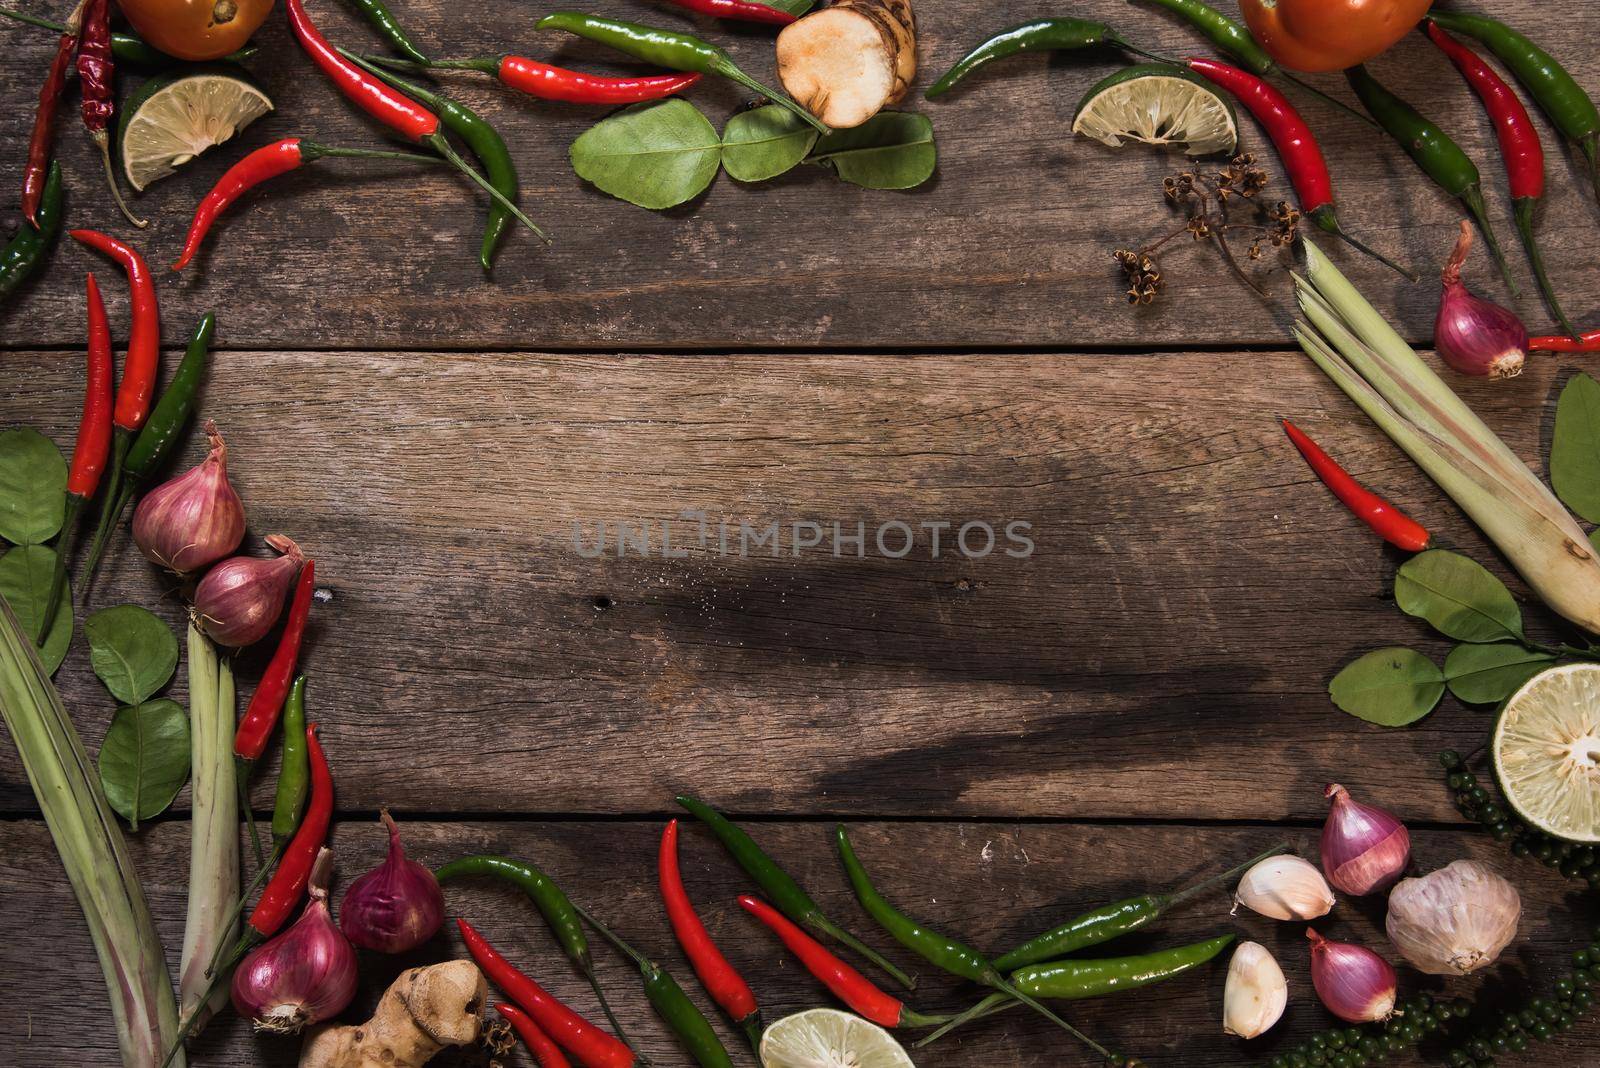 spices with ingredients on wood background. asian food, healthy or cooking concept.